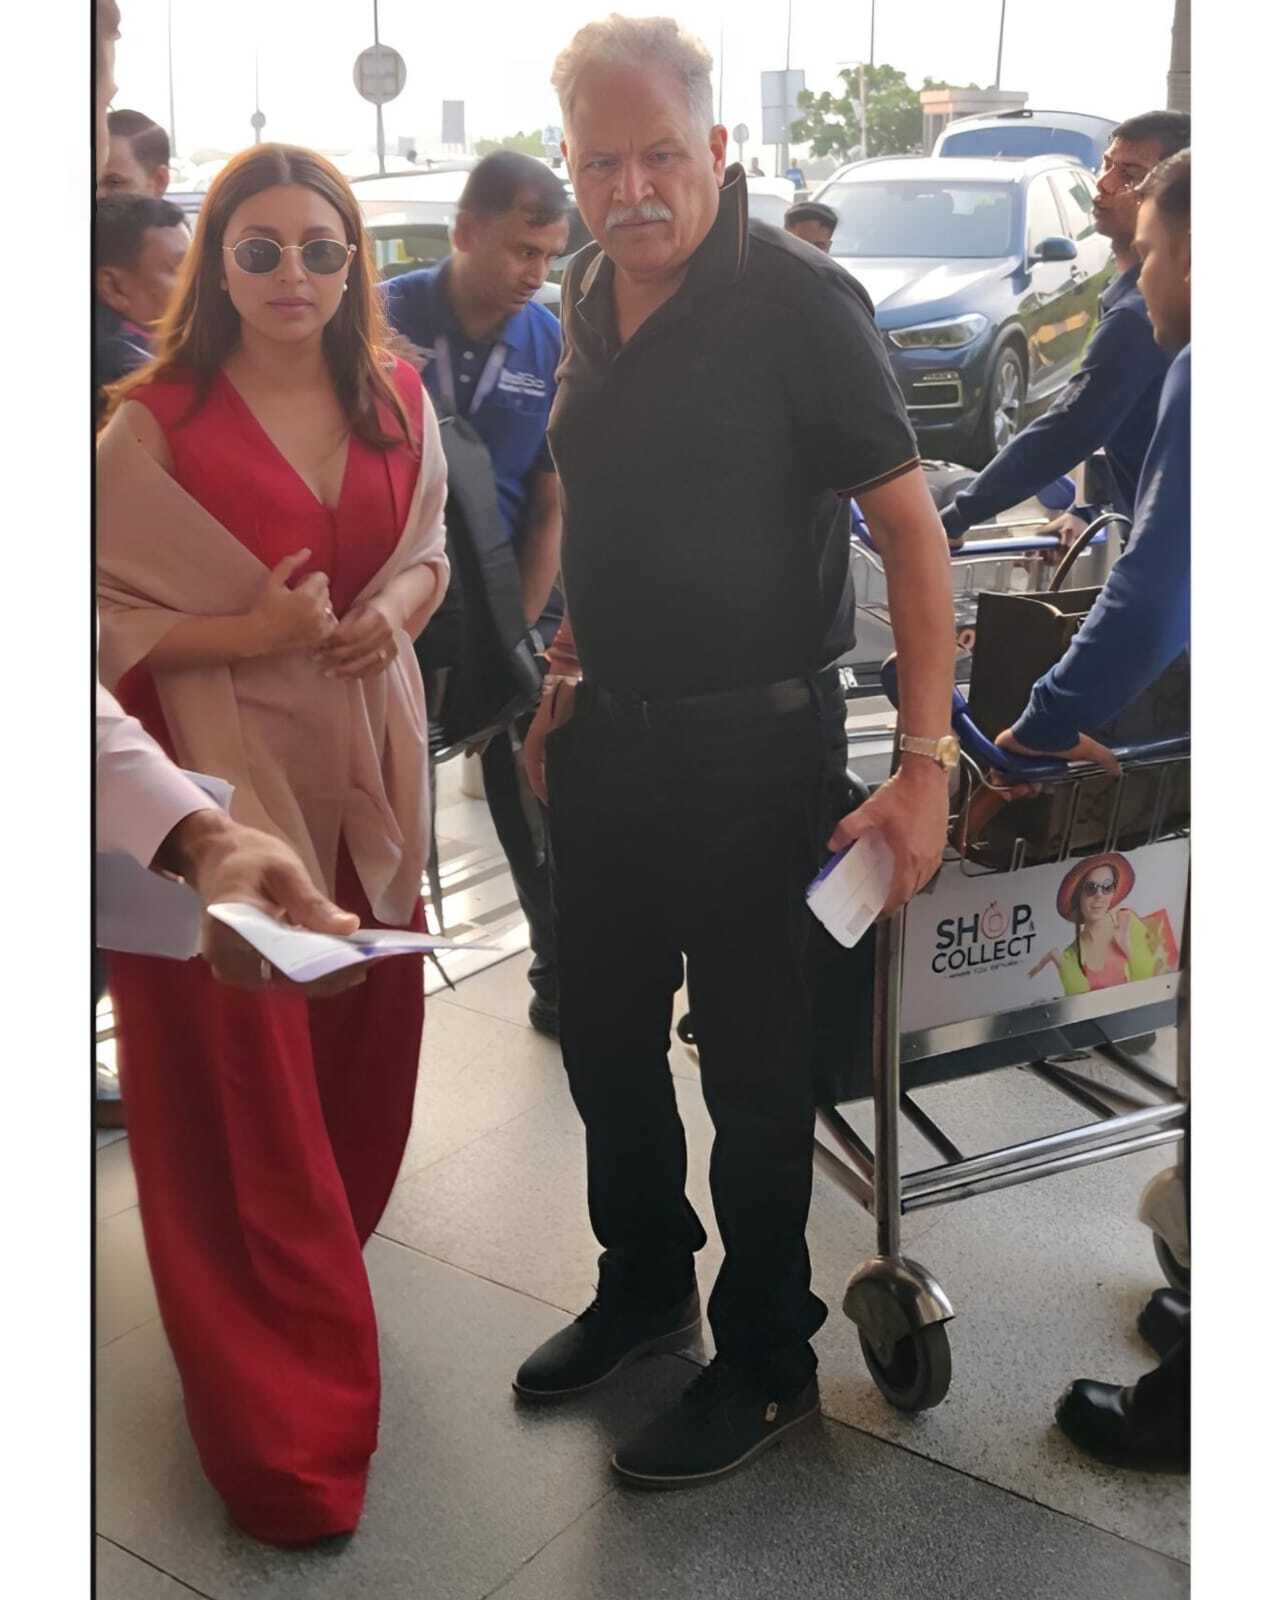 Parineeti Chopra was clicked with her father at the Delhi airport